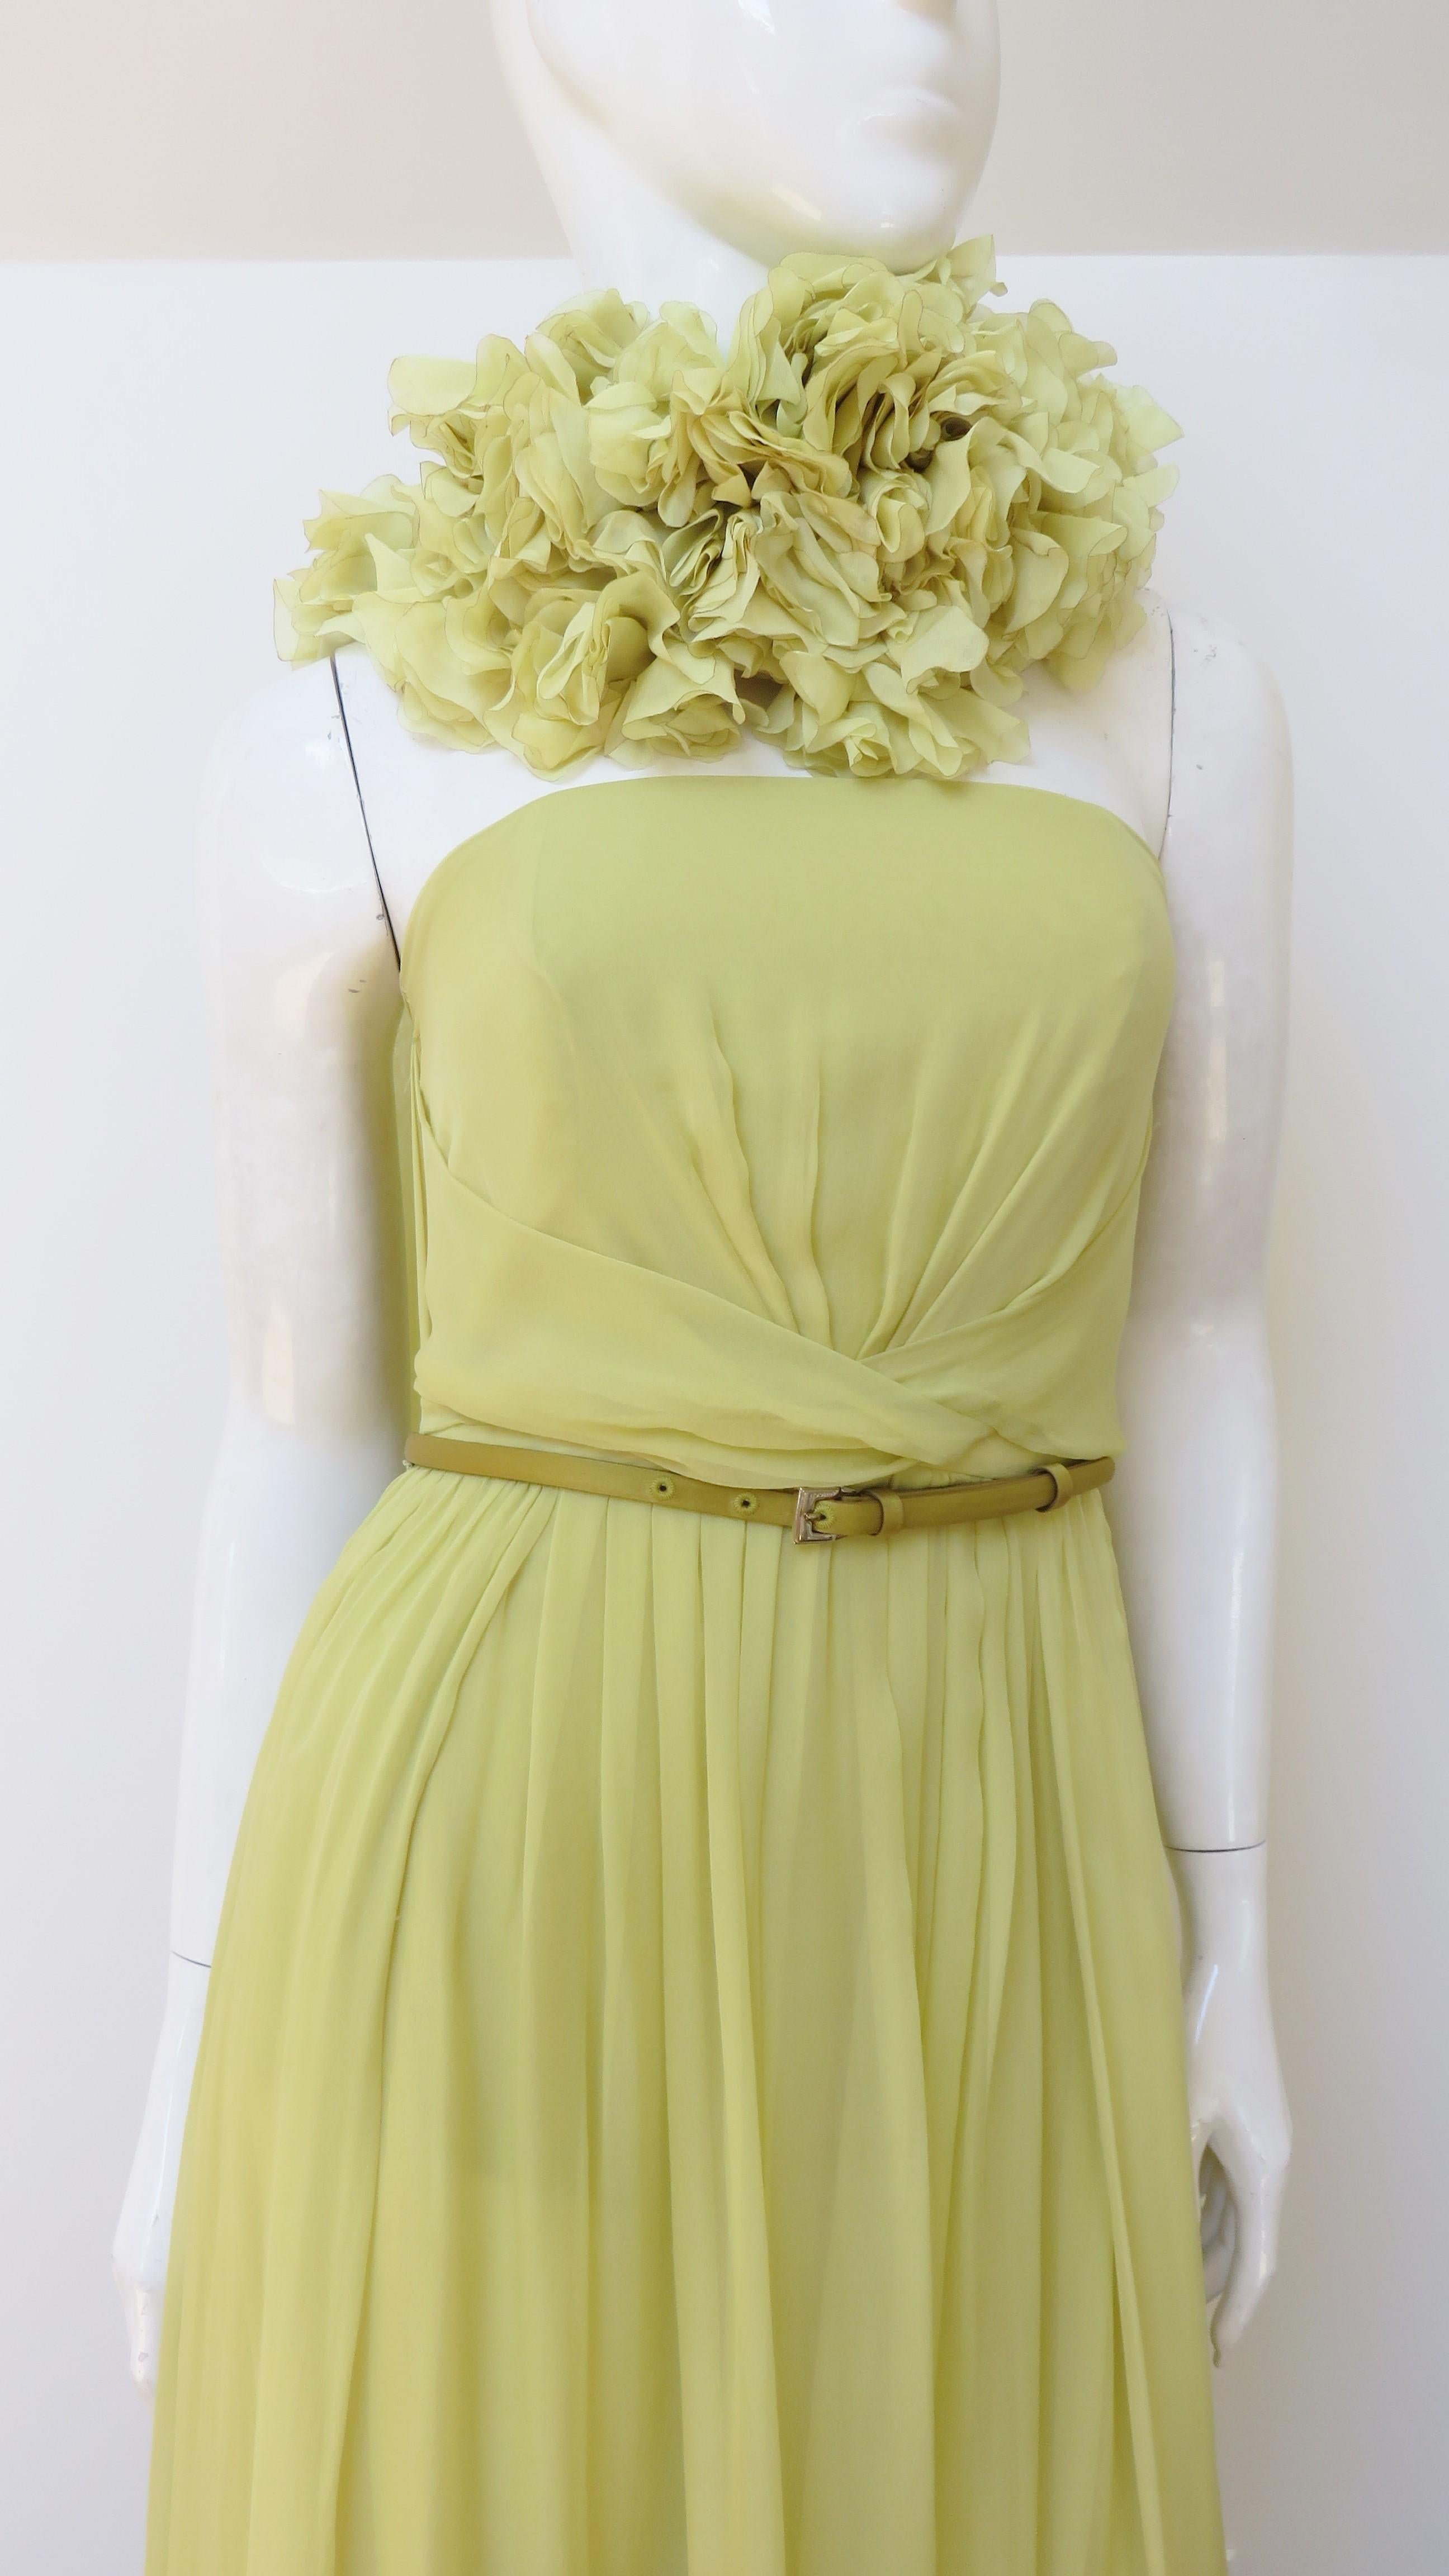 Gucci S/S 2011 Runway Strapless Gown, Flower Applique Wrap and Hot Pants For Sale 4